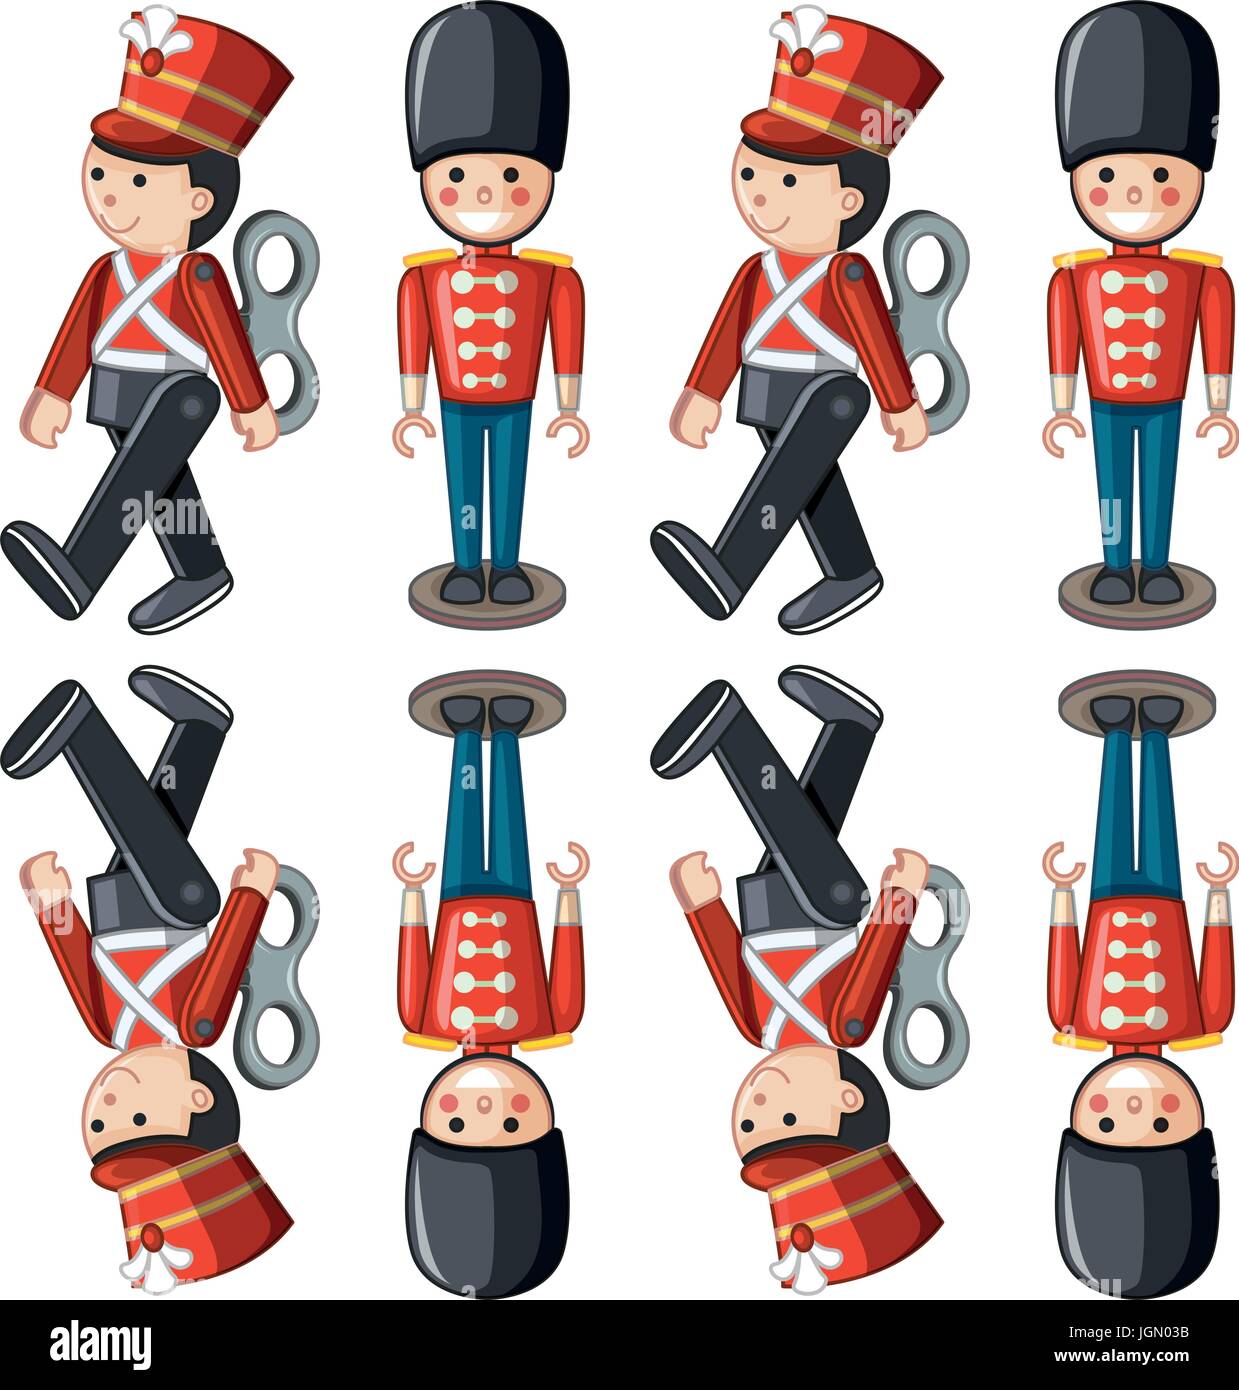 Toy soldiers in different positions illustration Stock Vector